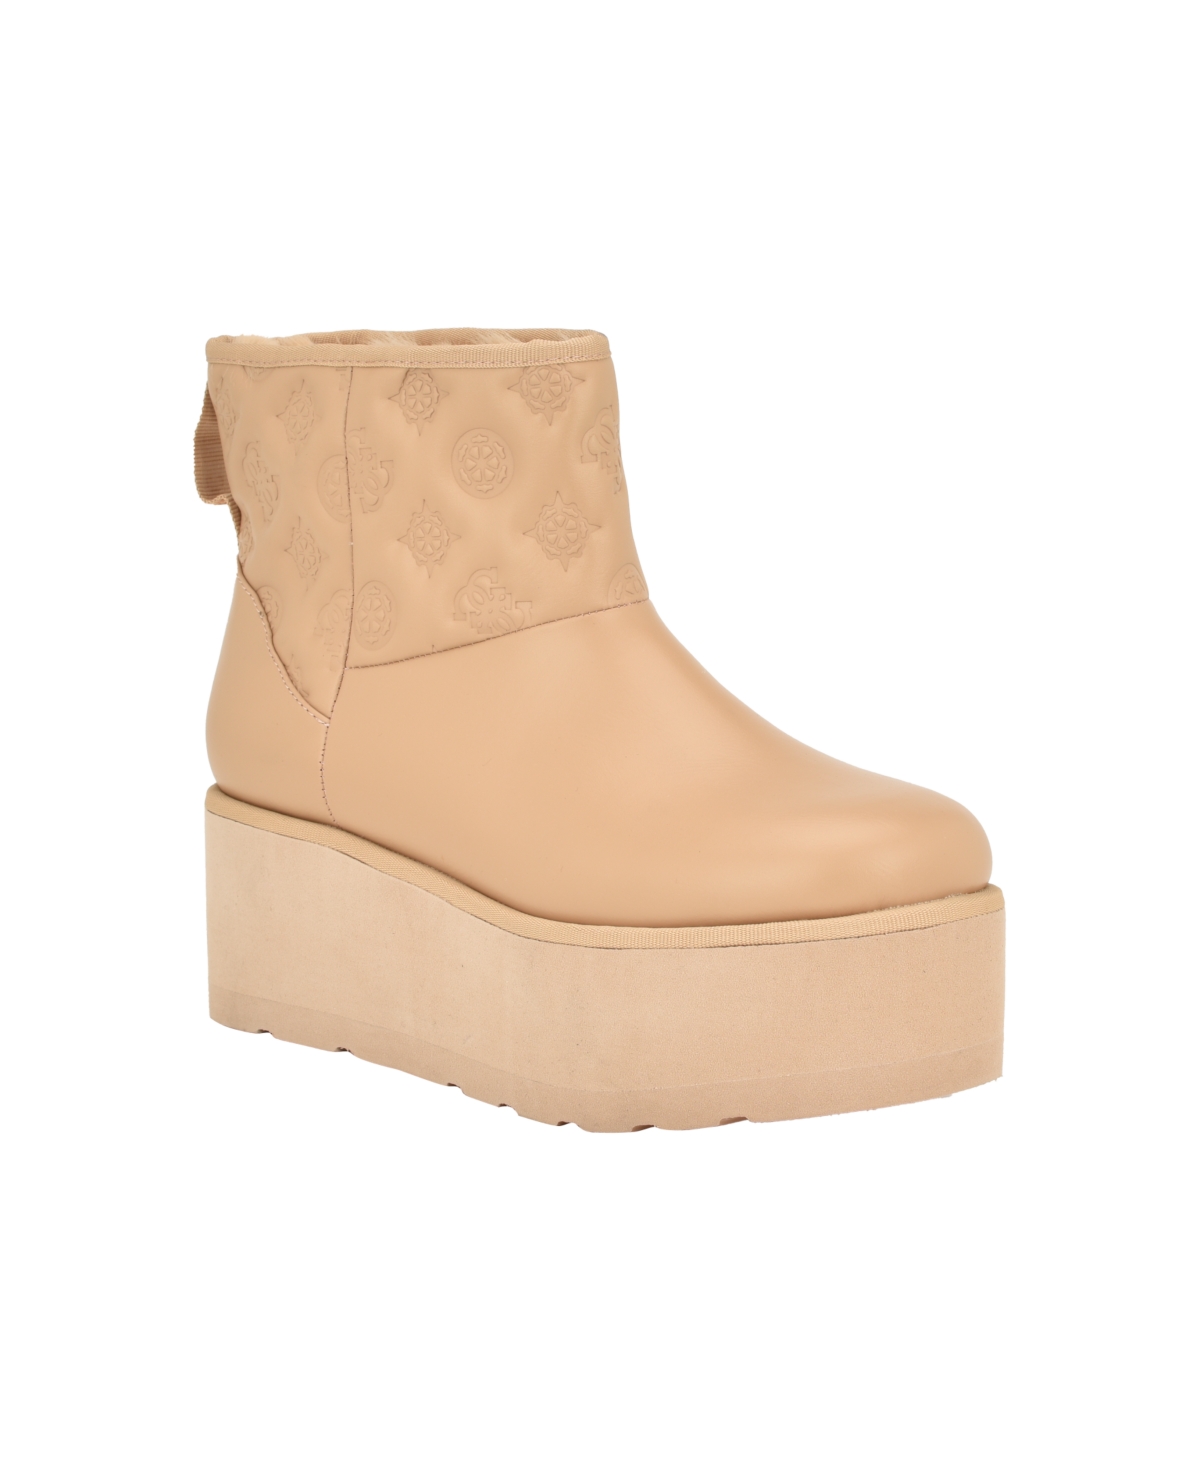 Guess Women's Jilla Platform Cold Weather Slip-on Ankle Booties In Medium Natural Logo